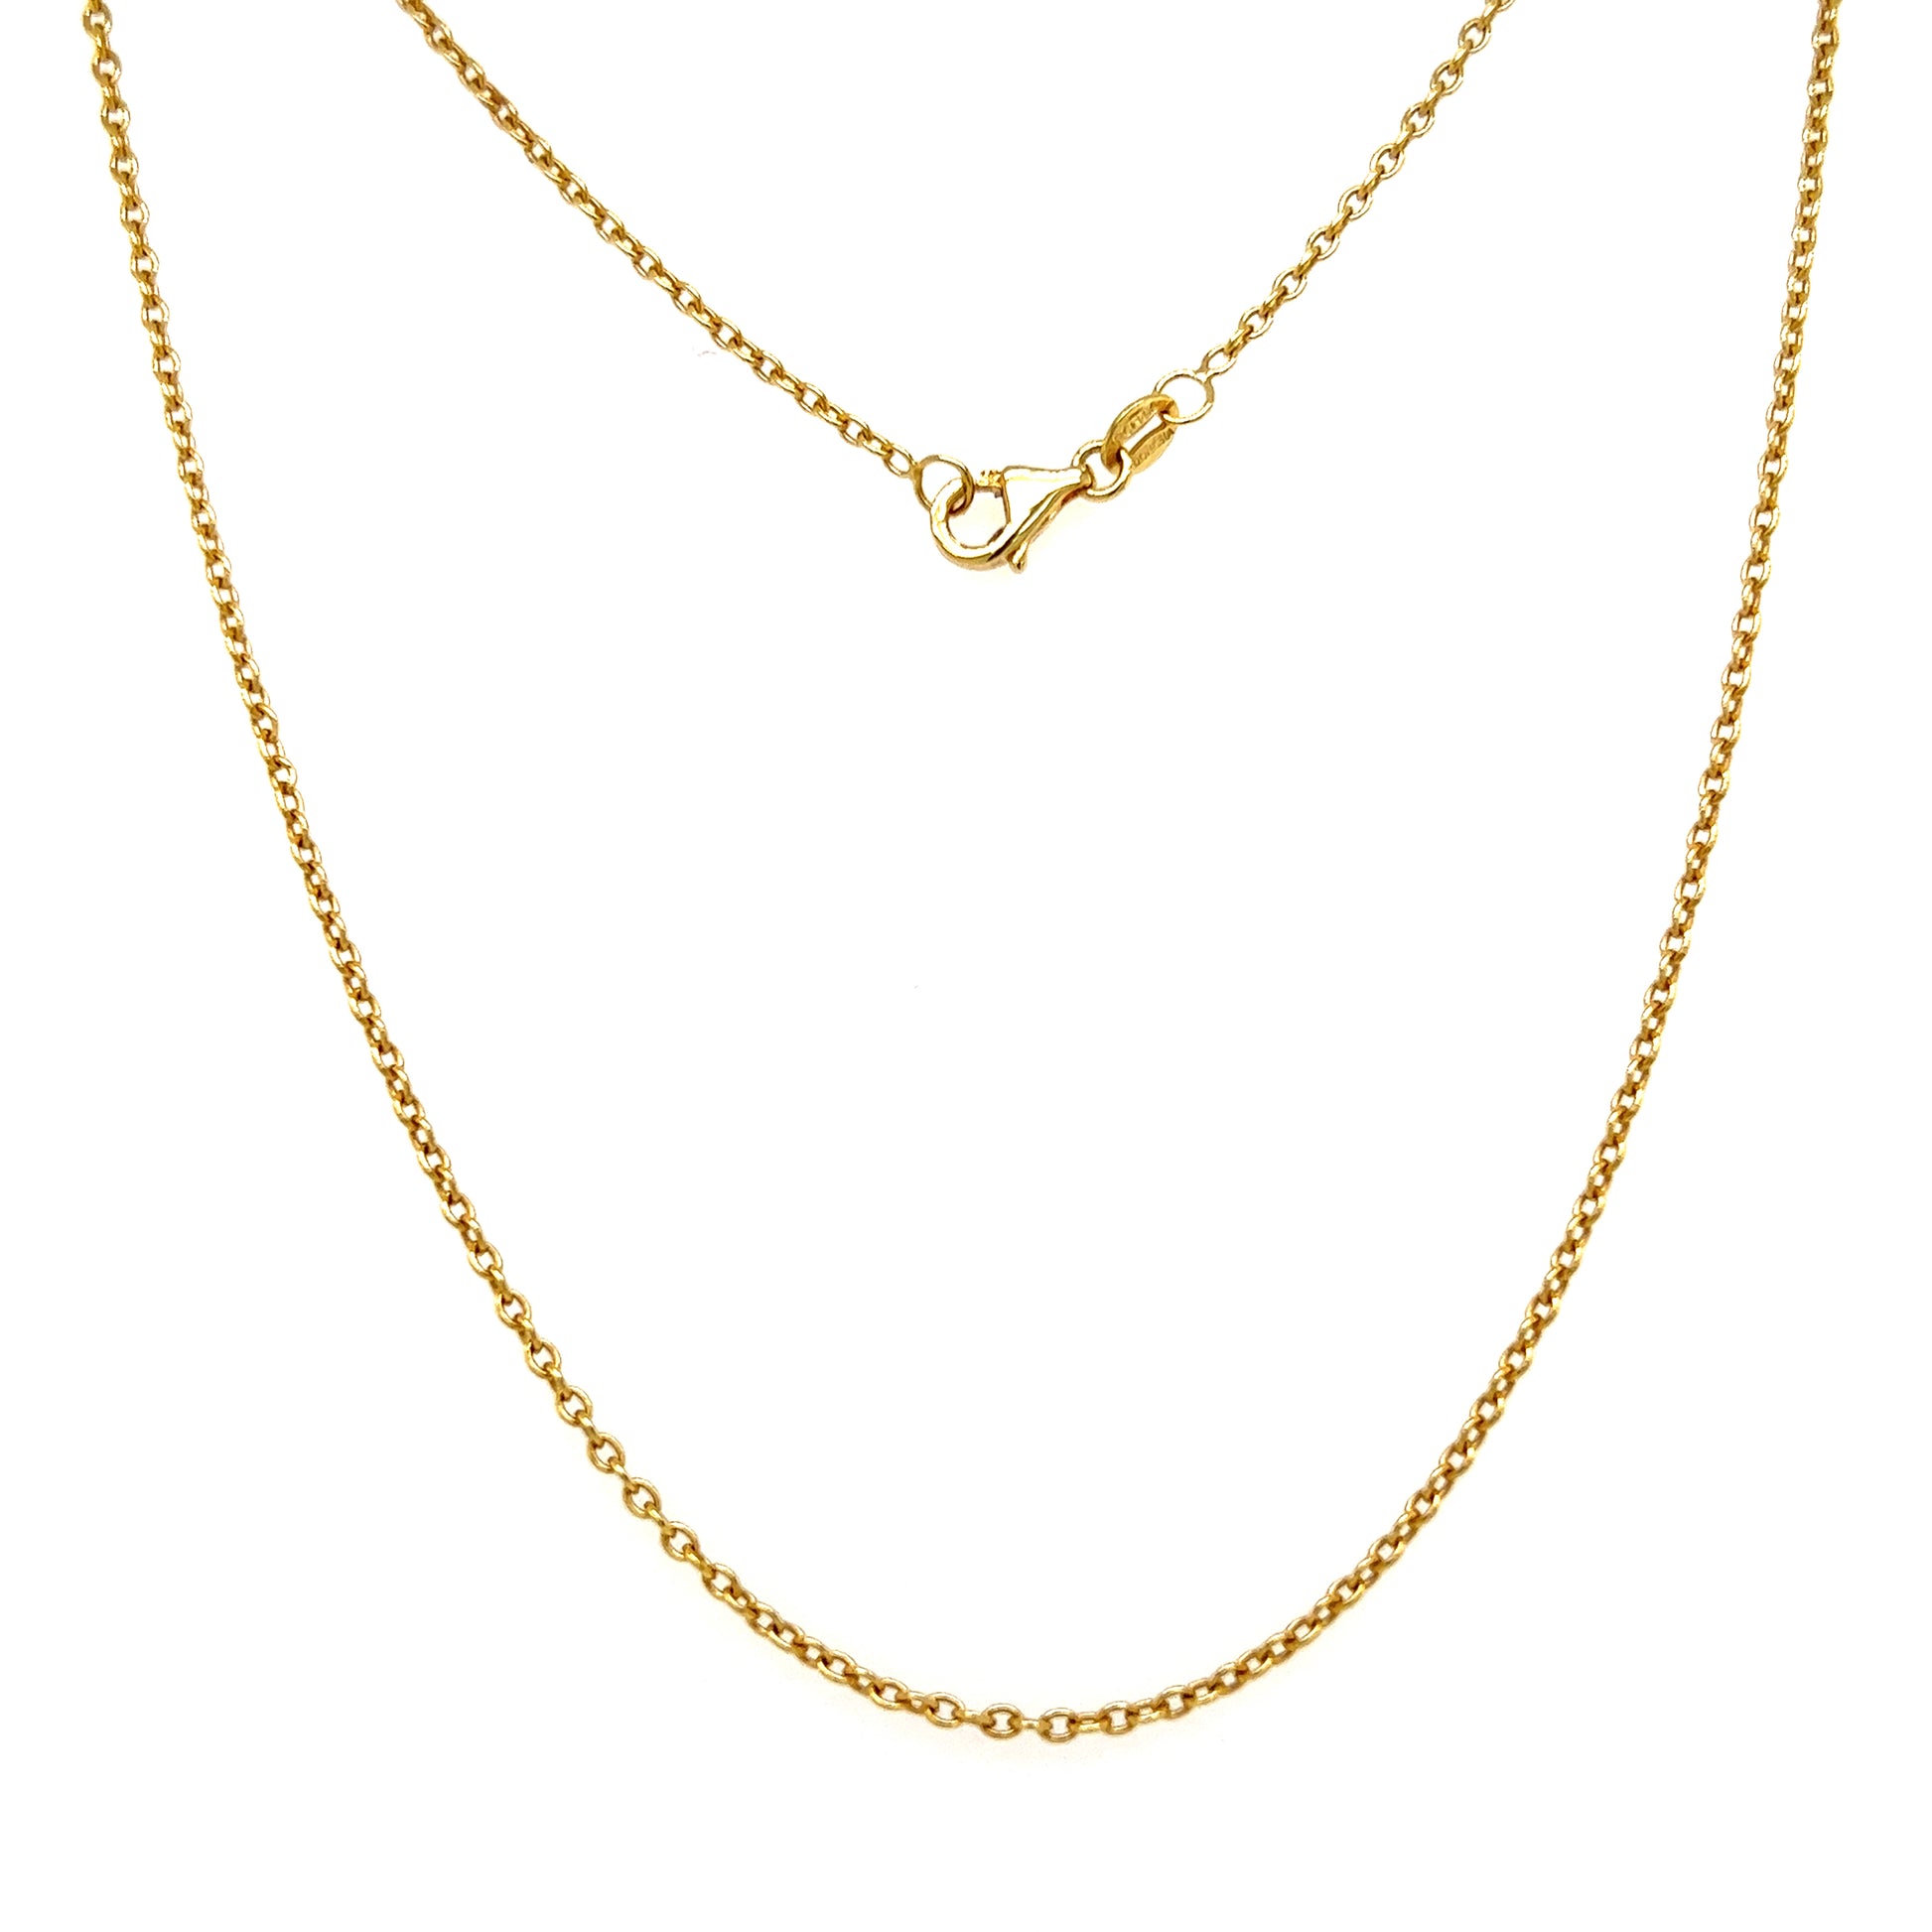 Cable 1.5mm Chain with 18in Length in 14K Yellow Gold Full Chain View